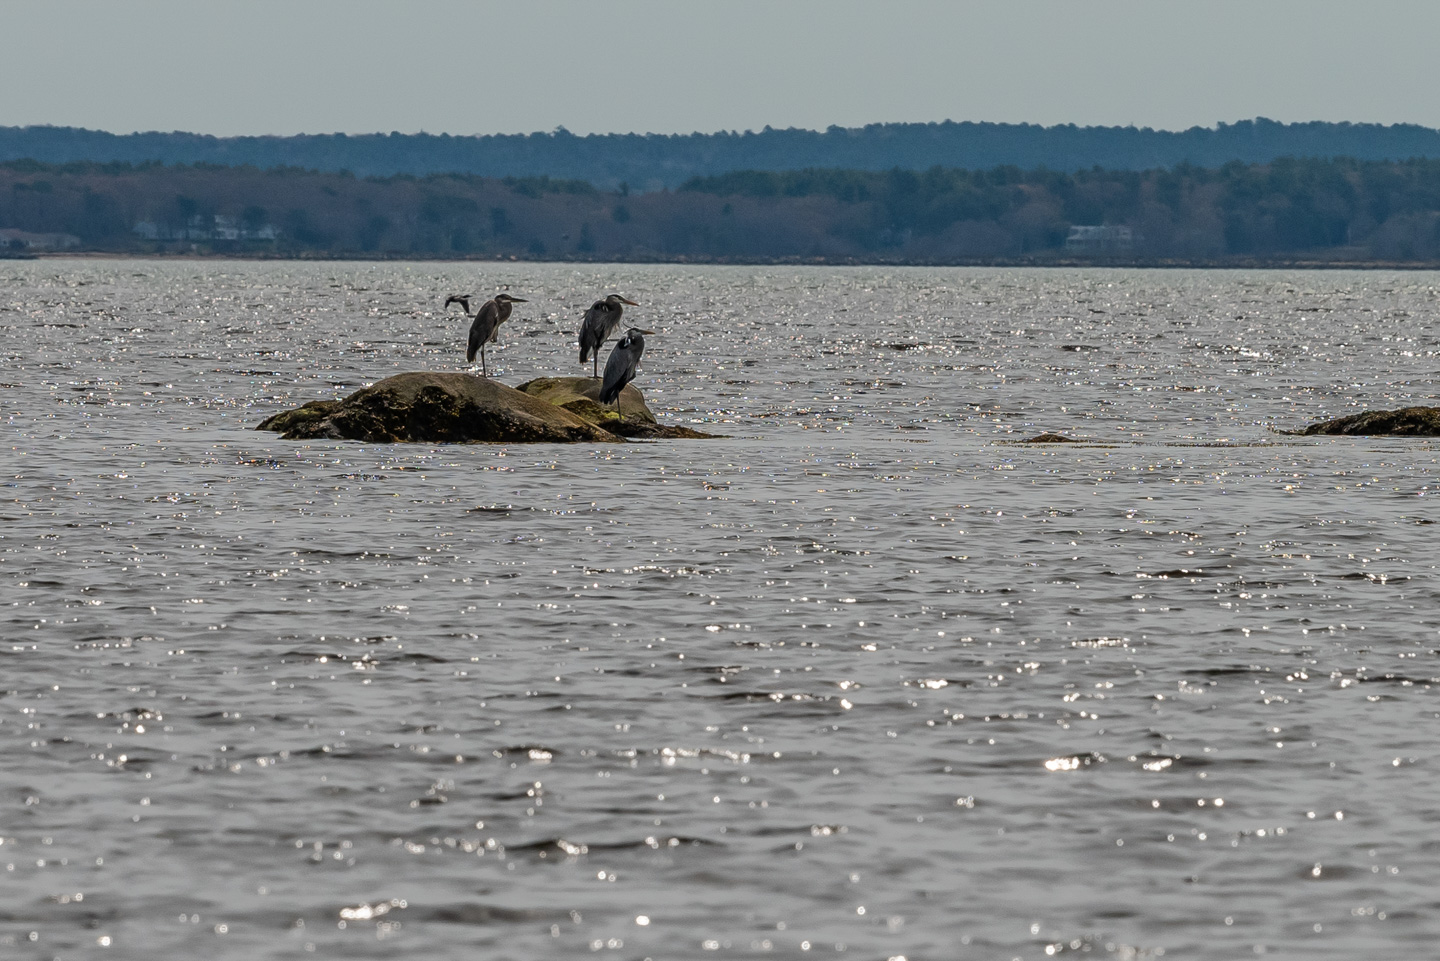 Three Great Blue Herons standing on a rock, all looking the same direction